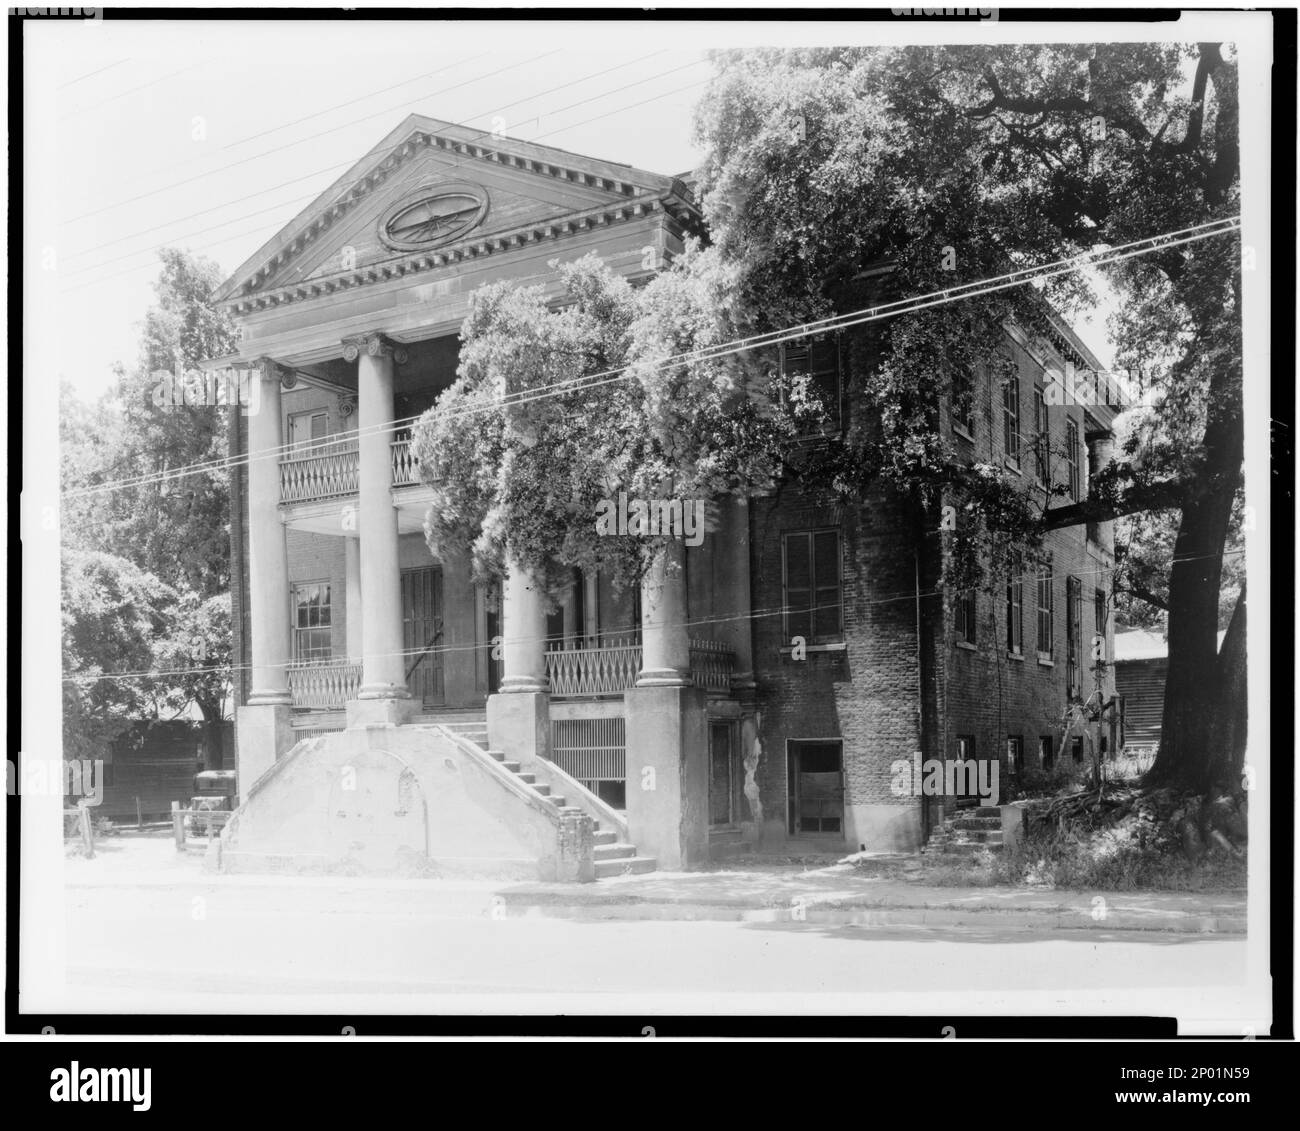 Choctaw, Natchez vic., Adams County, Mississippi. Carnegie Survey of the Architecture of the South. United States, Mississippi, Adams County, Natchez vic, Pediments, Columns, Hand railings, Porticoes , Porches, Houses. Stock Photo